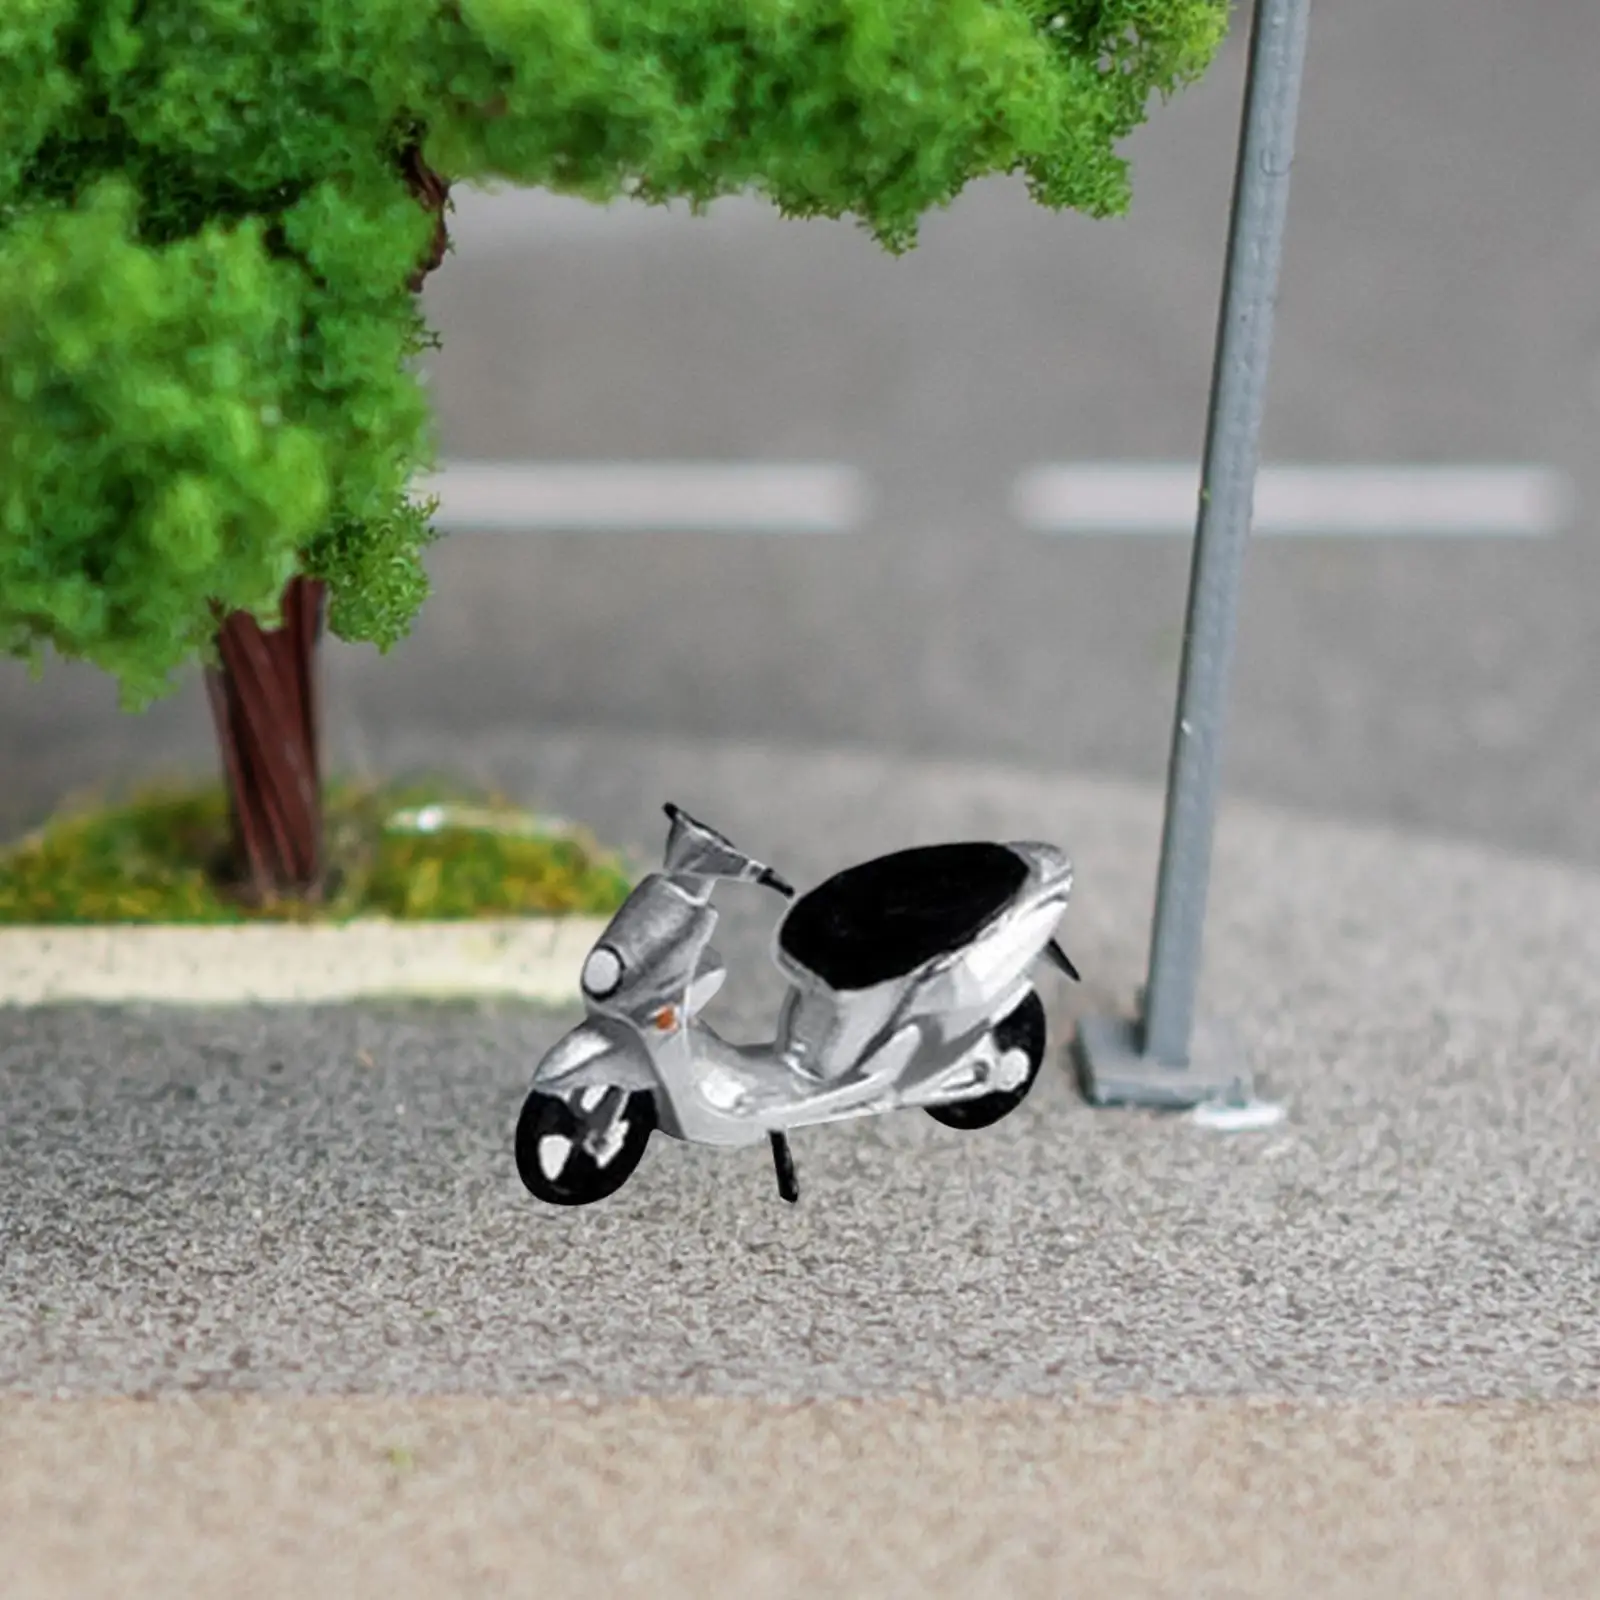 1:64 Diorama Street Motorcycle Model Simulation Mini Vehicles Toys for Dollhouse Miniature Scene Photography Props Decoration